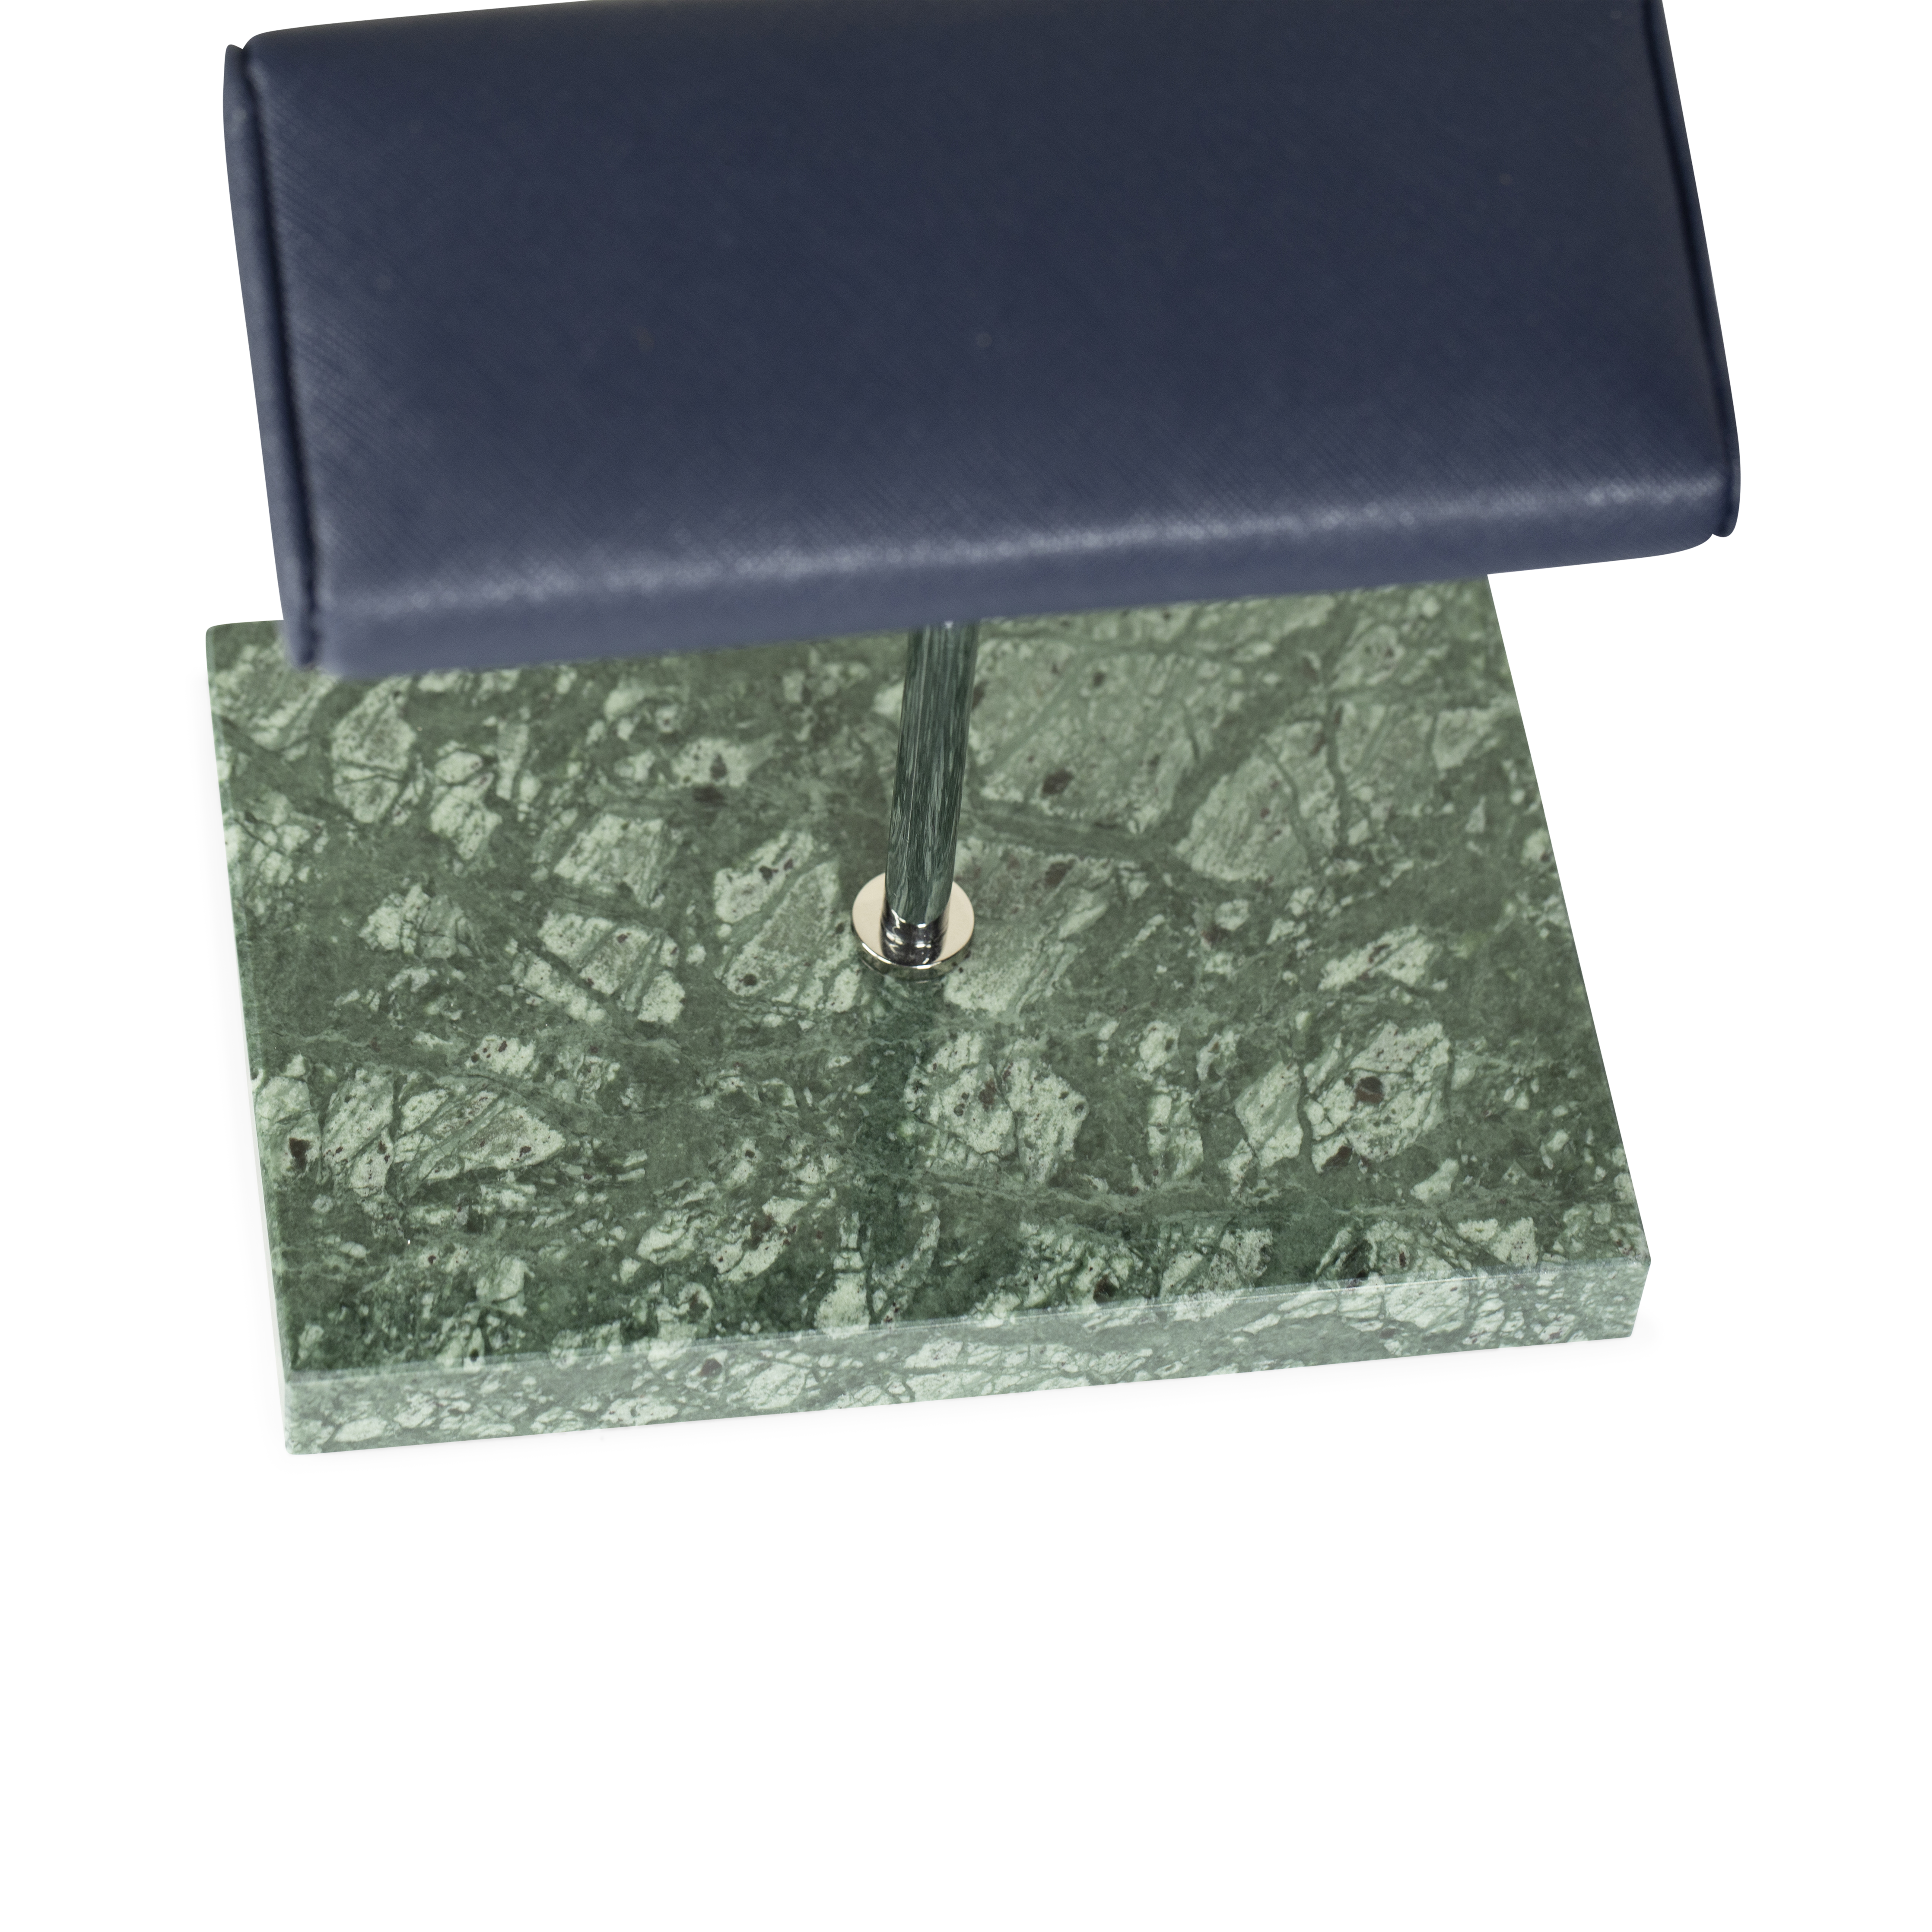 Marble Dual Watch Stand - Saffiano Navy Blue | Green Marble